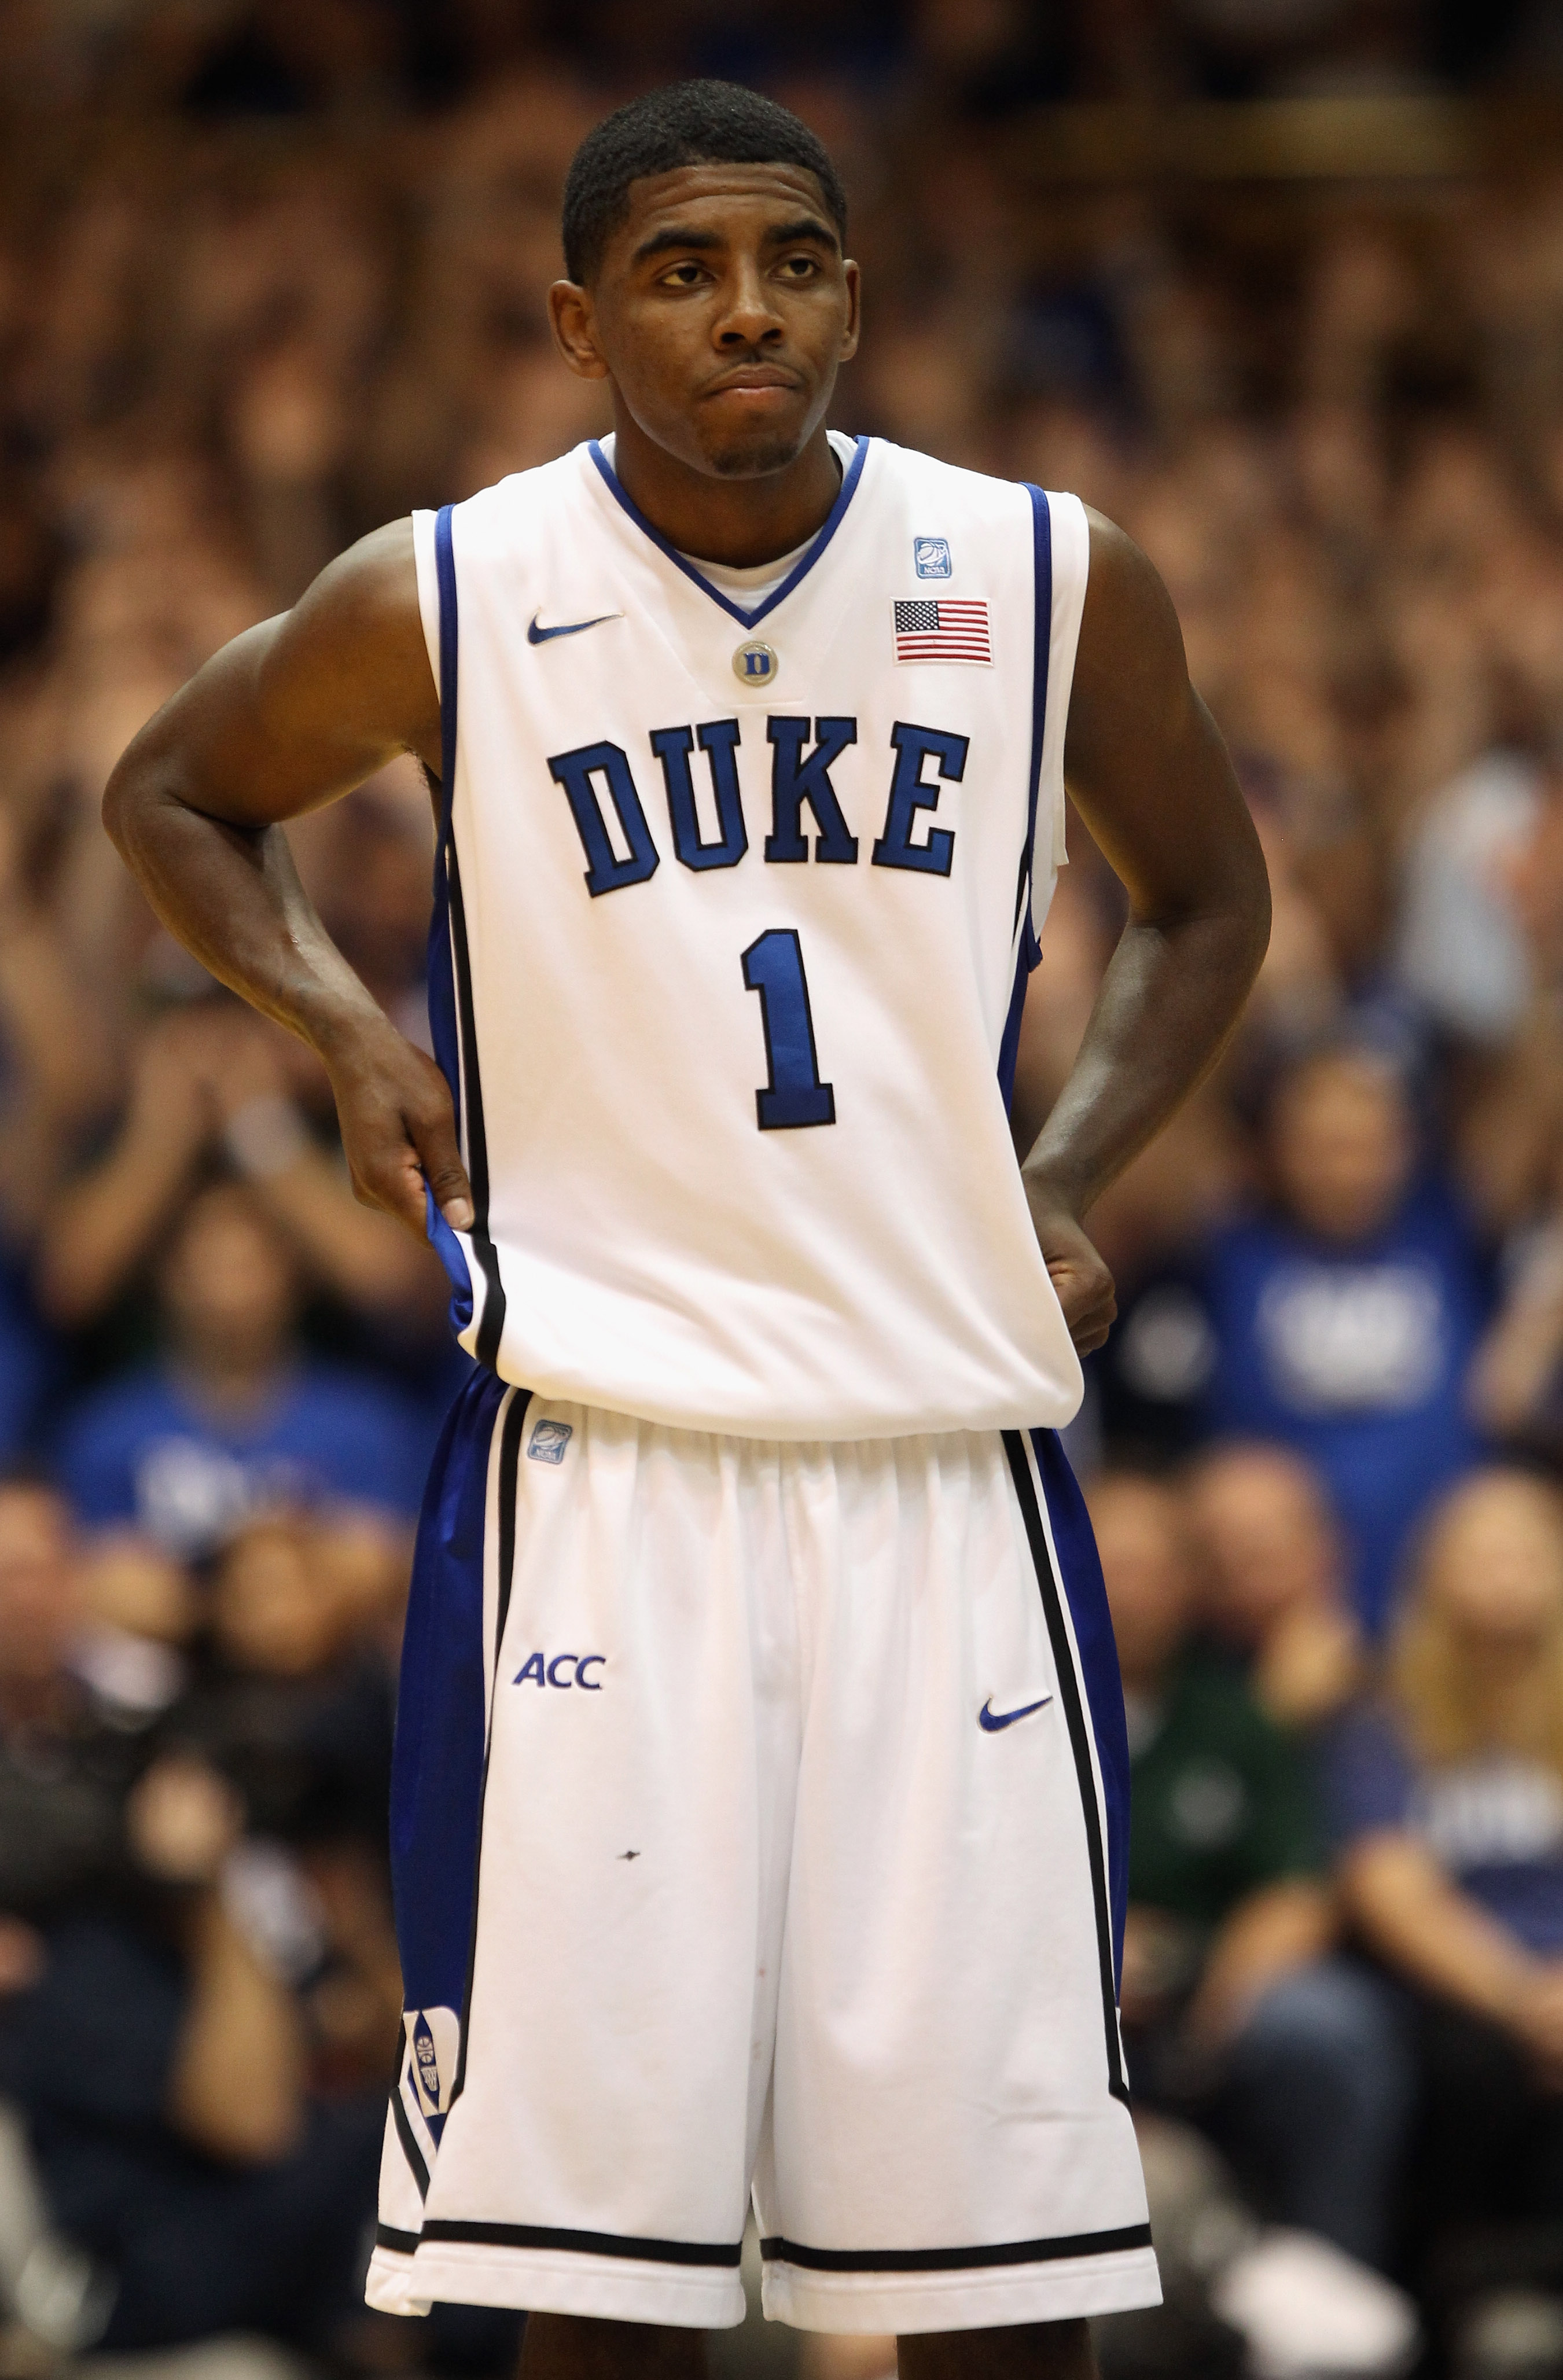 Kyrie Irving Only Played in 11 Games at Duke, but His Former